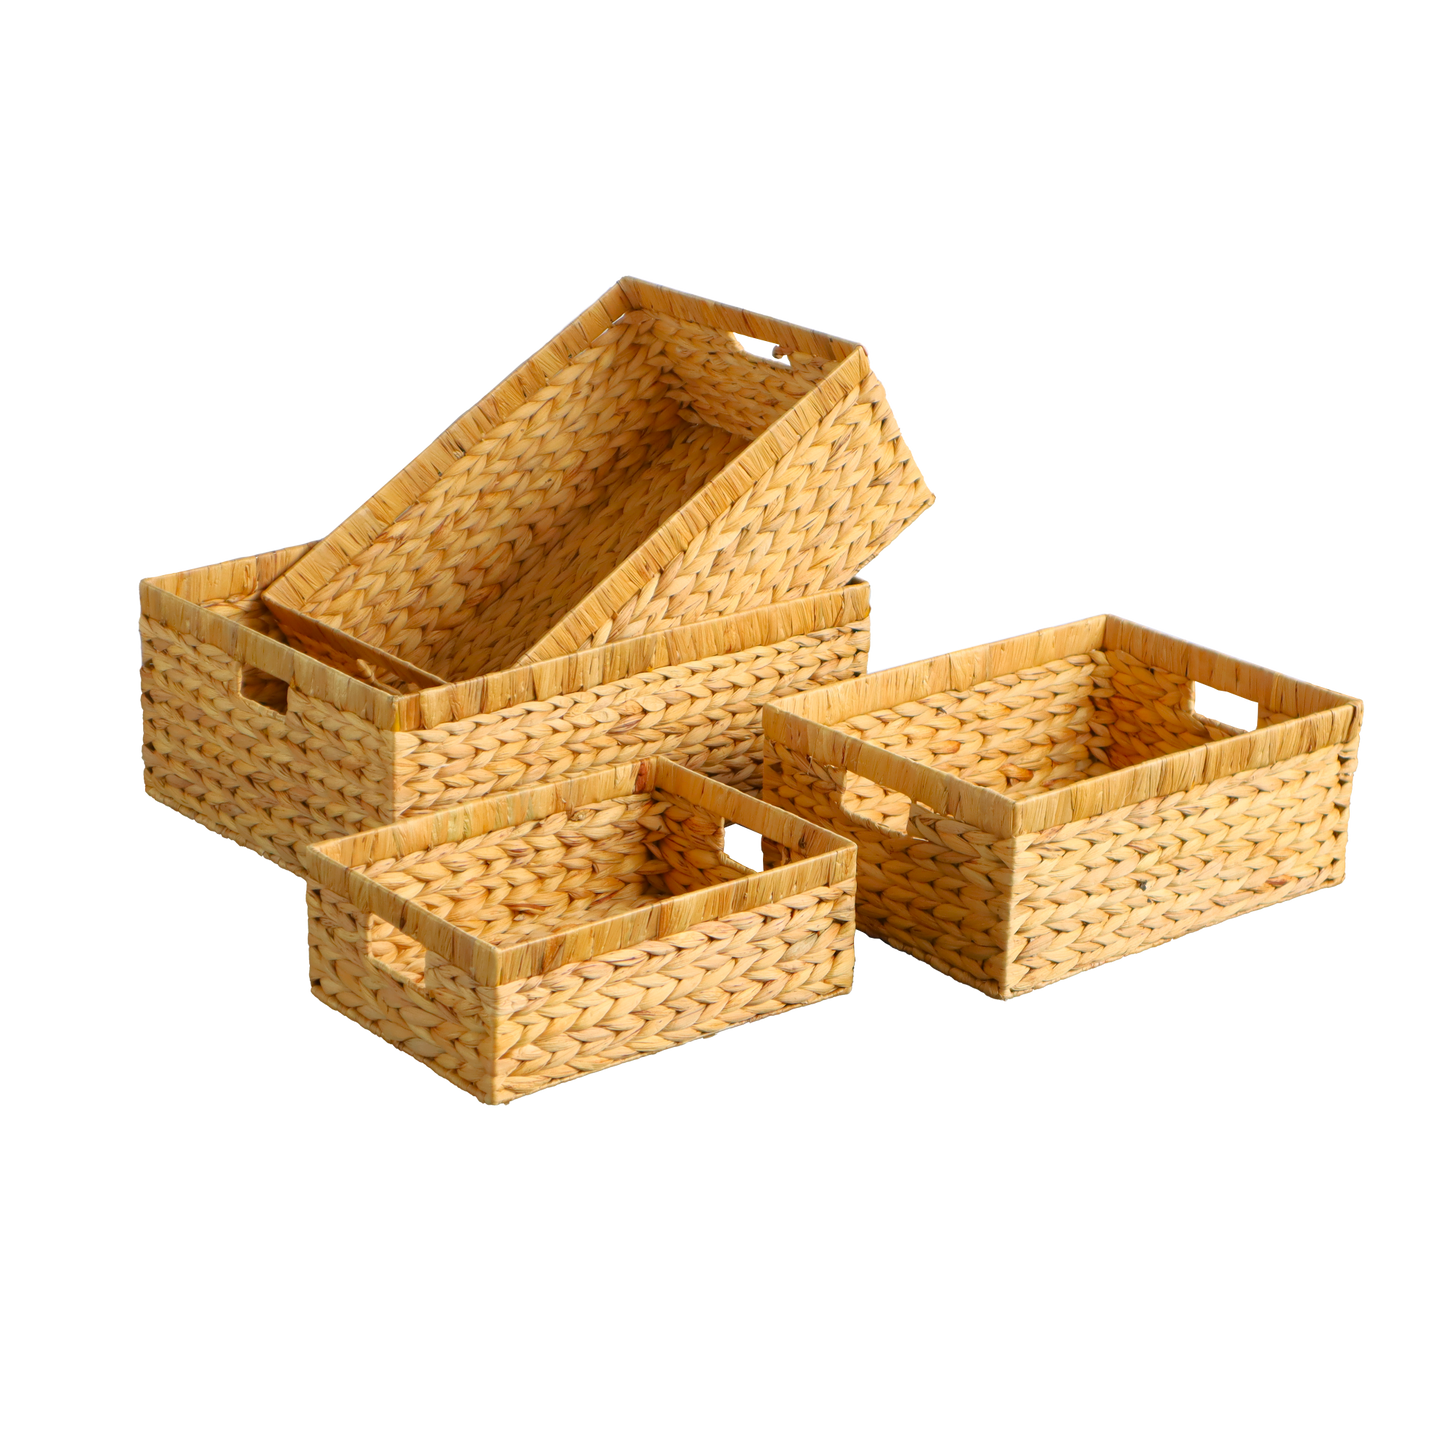 Eden Grace Set of 4 Hand-Woven Wicker Baskets. with Arrow Weave Design- Eco-Friendly Nesting Storage Bins for Home Organization in Bedroom, Bathroom, Laundry Room or Kitchen